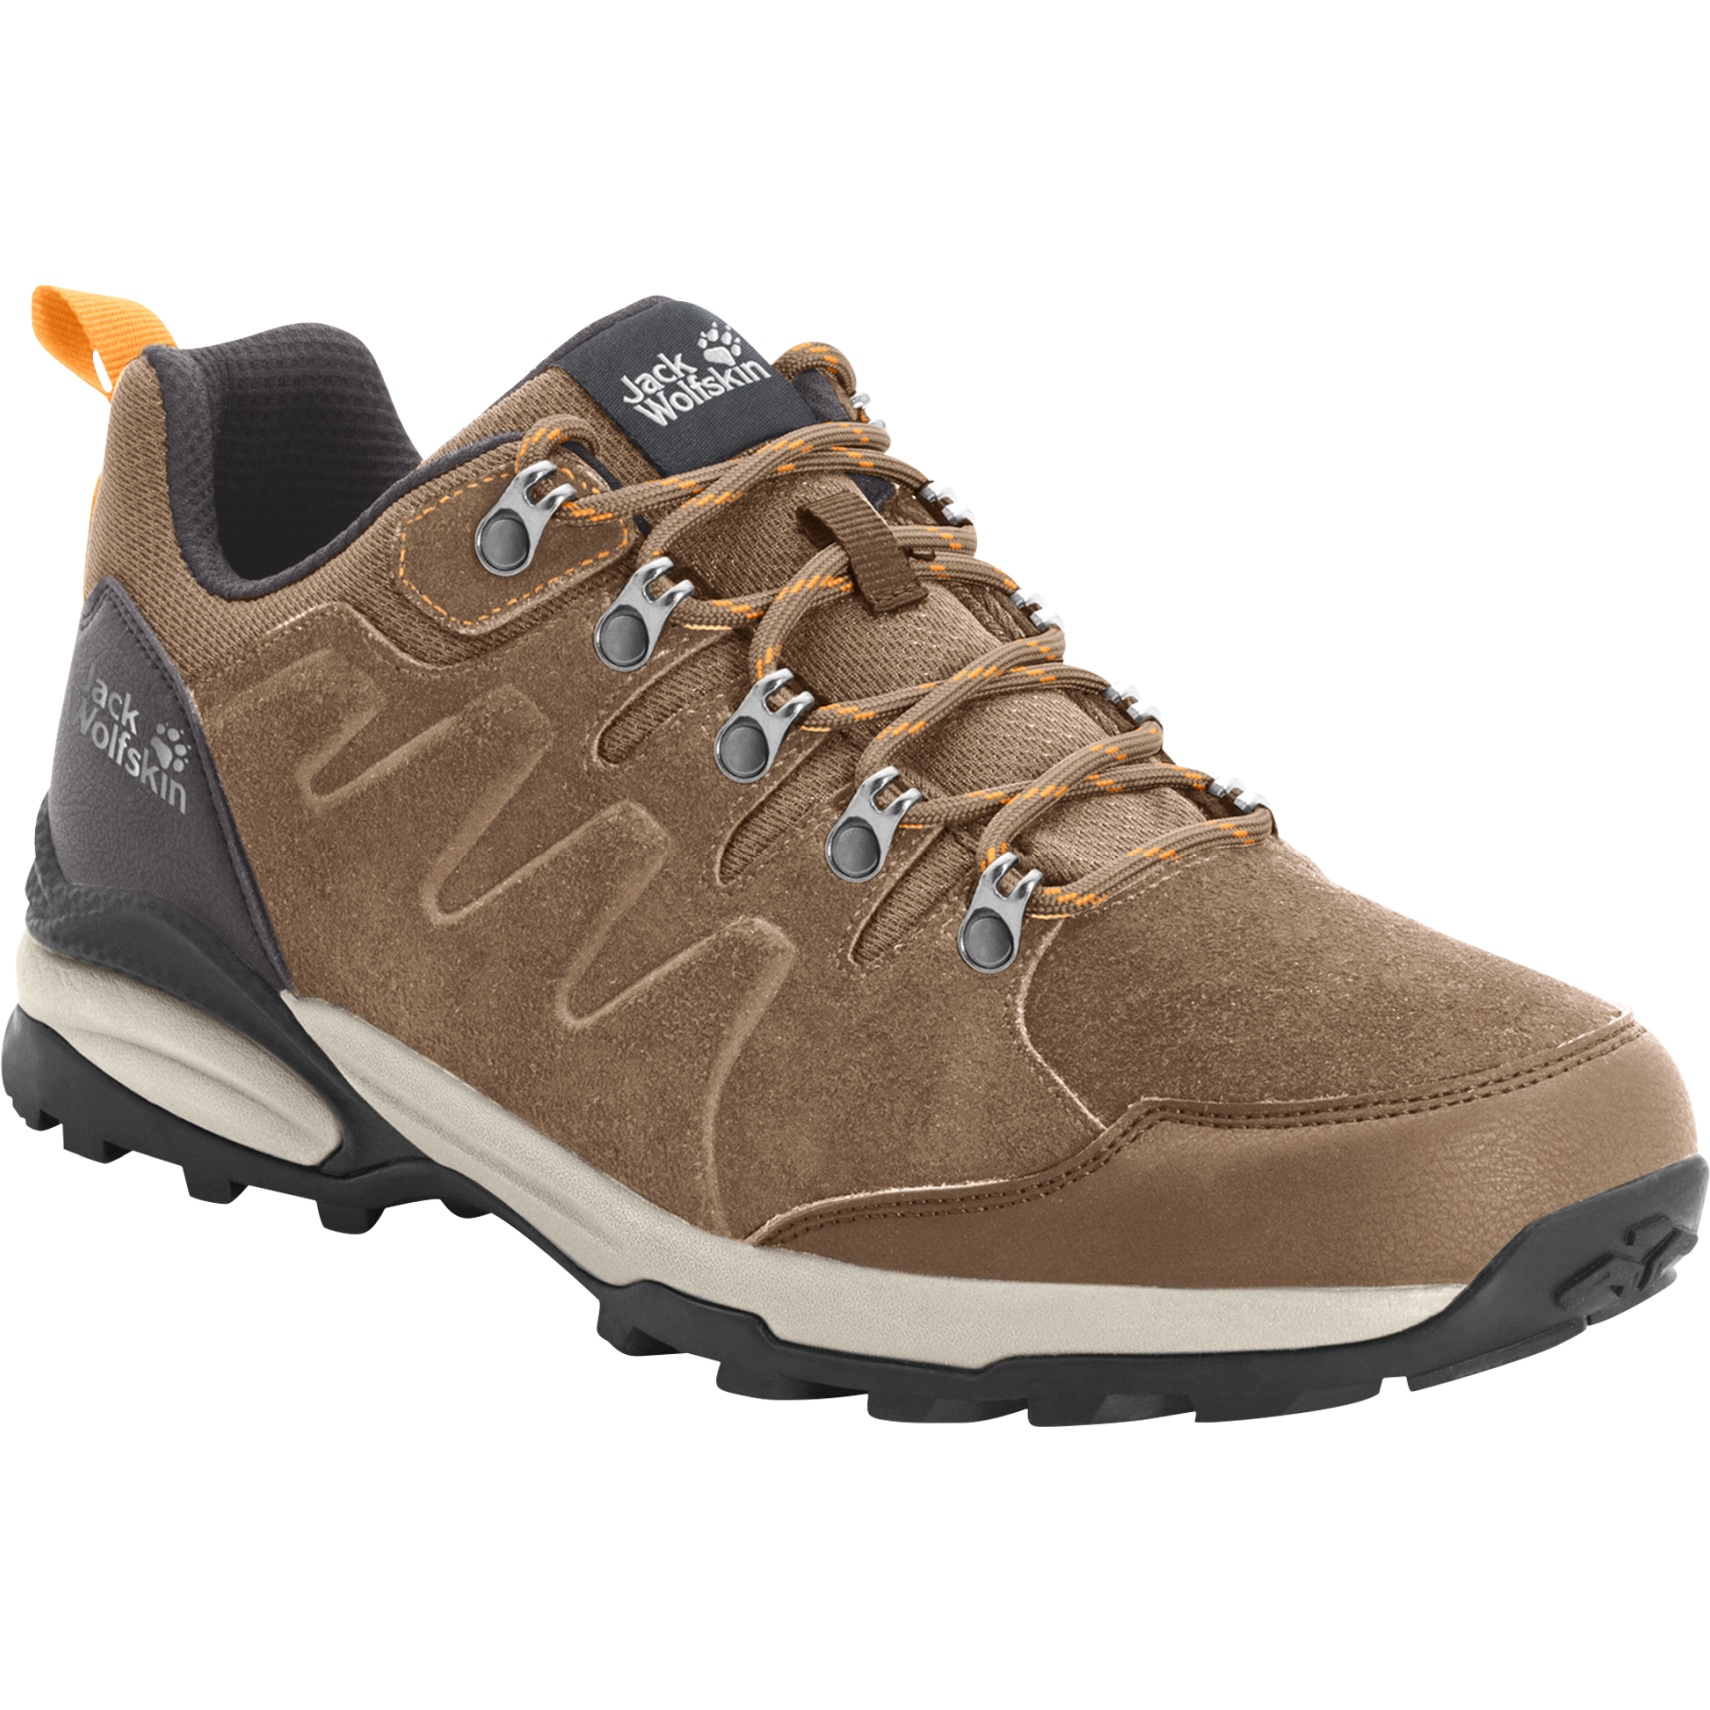 Picture of Jack Wolfskin Refugio Texapore Low Hiking Shoes Women - brown / apricot